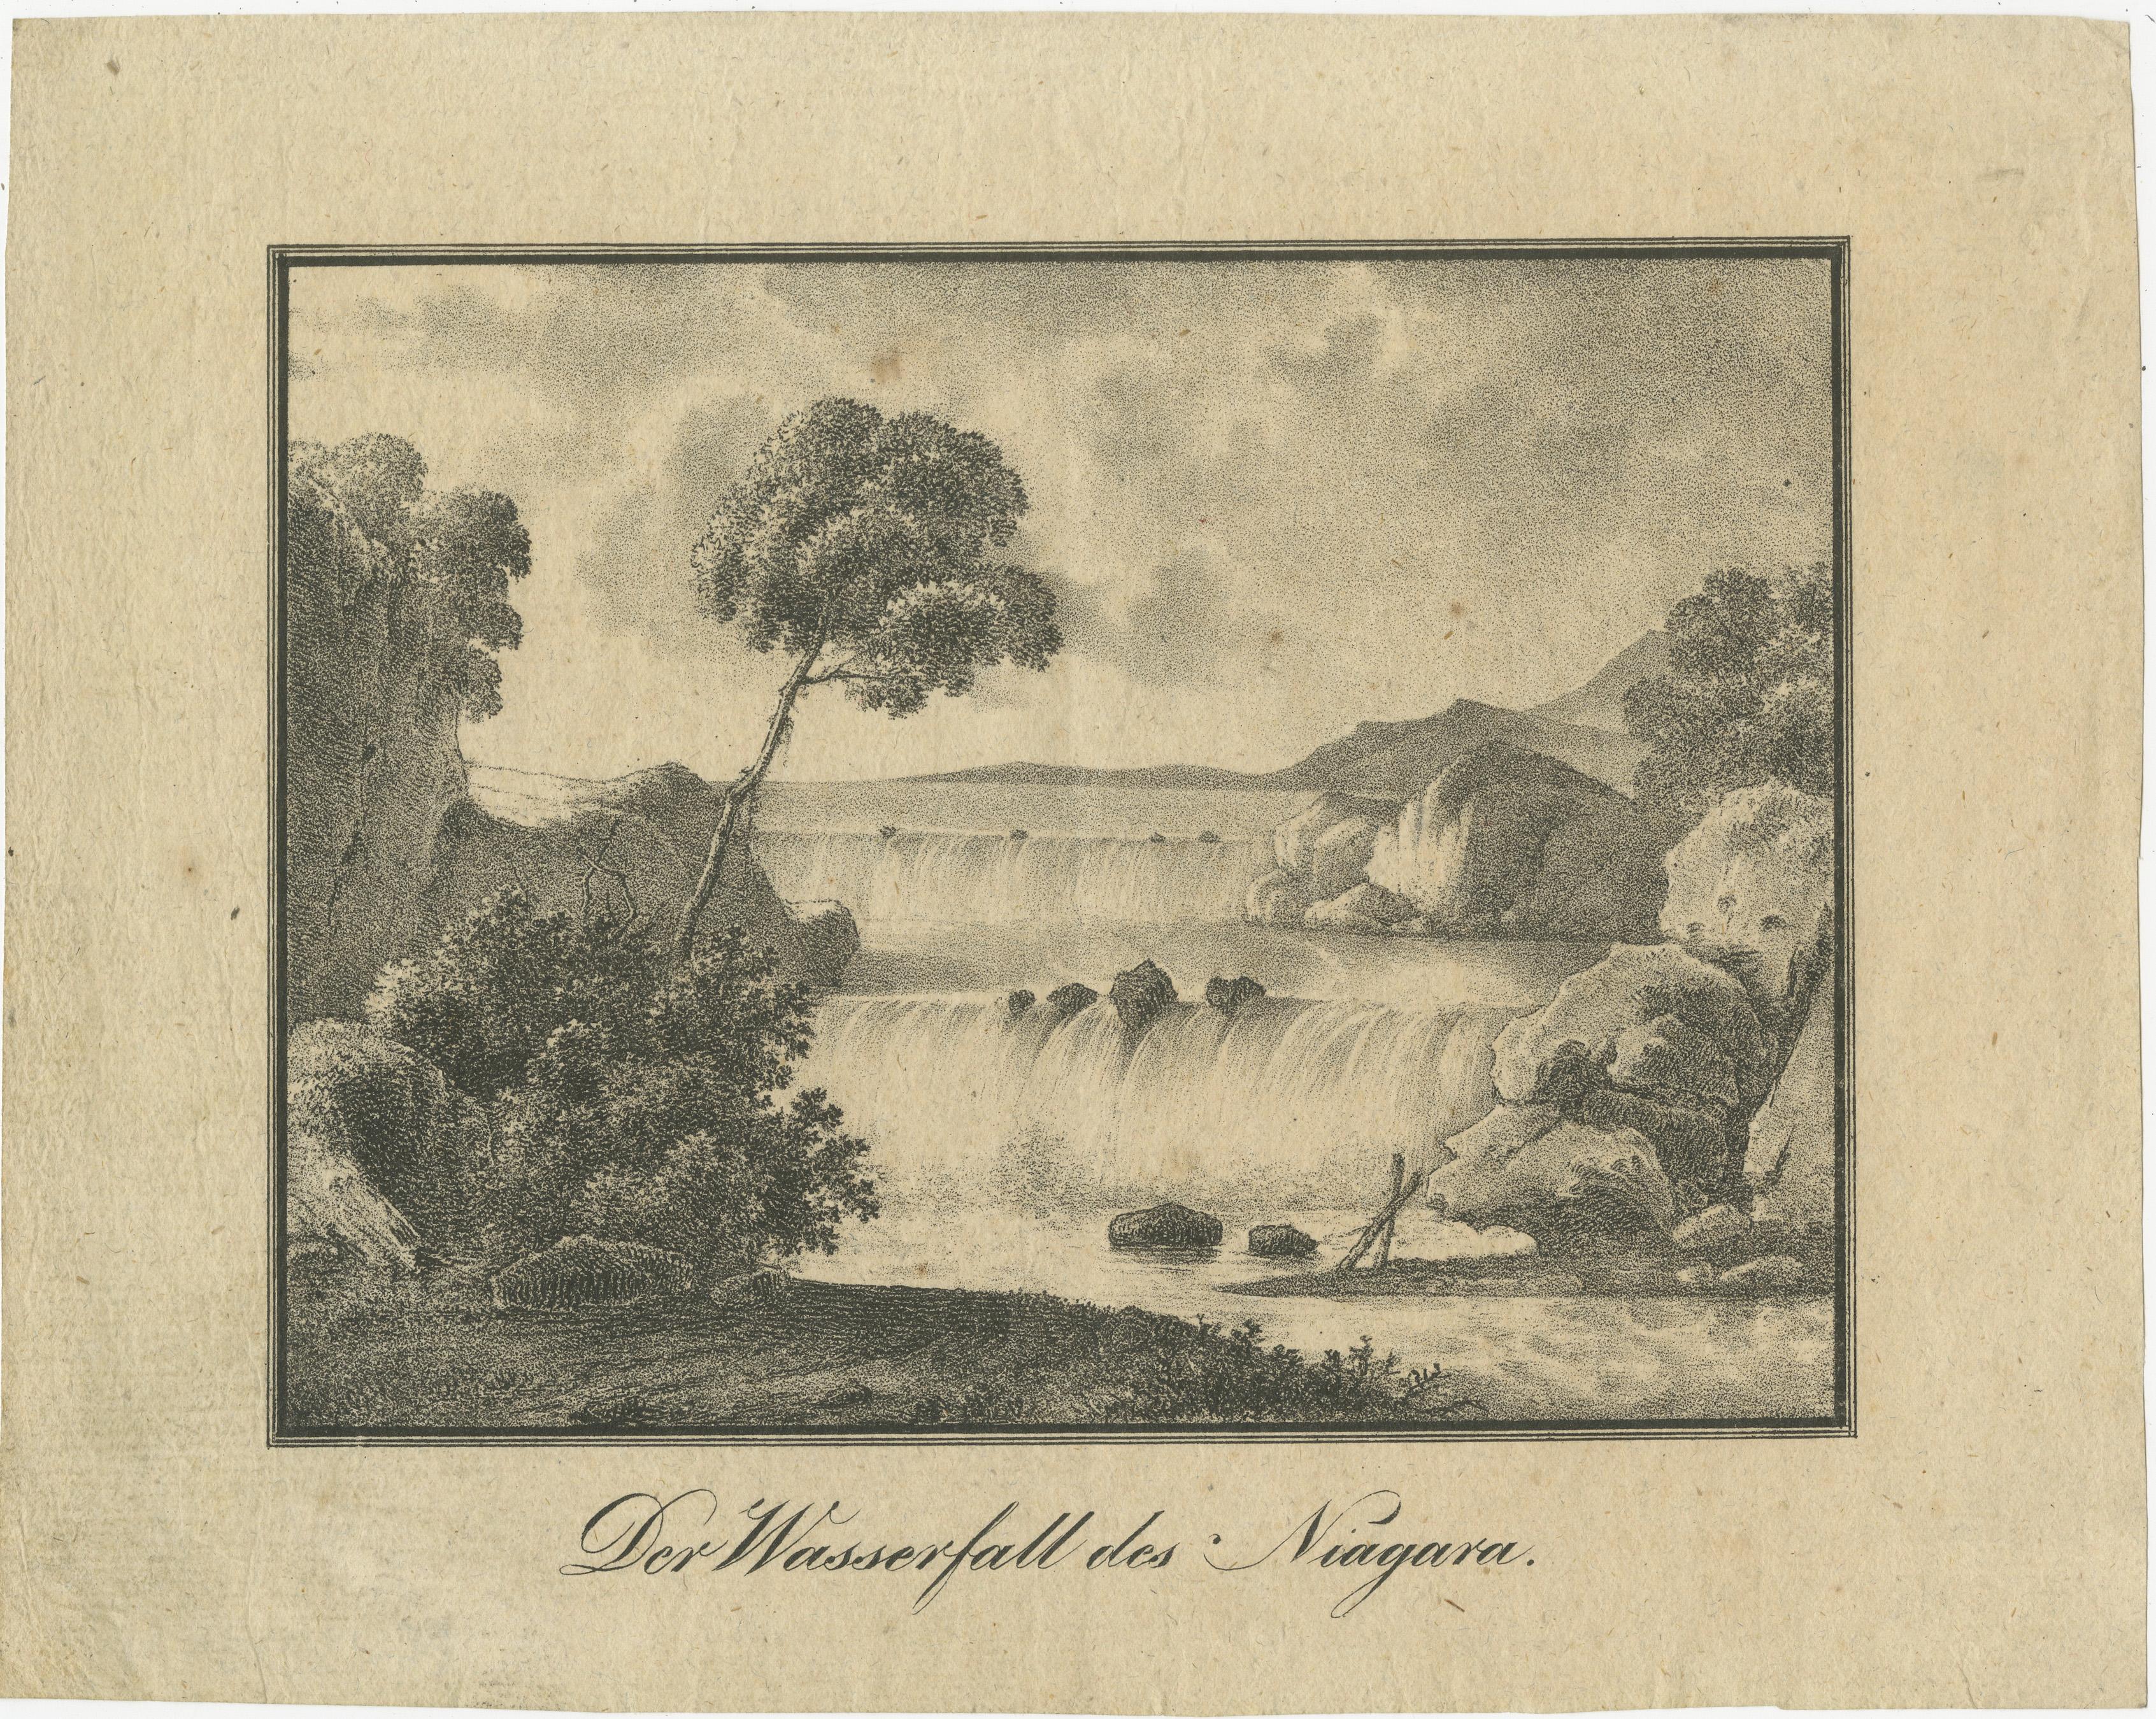 Antique print titled 'Der Wasserfall des Niagara'. Original antique print of the Niagara Falls. With German title. Source unknown, to be determined. Published circa 1820.